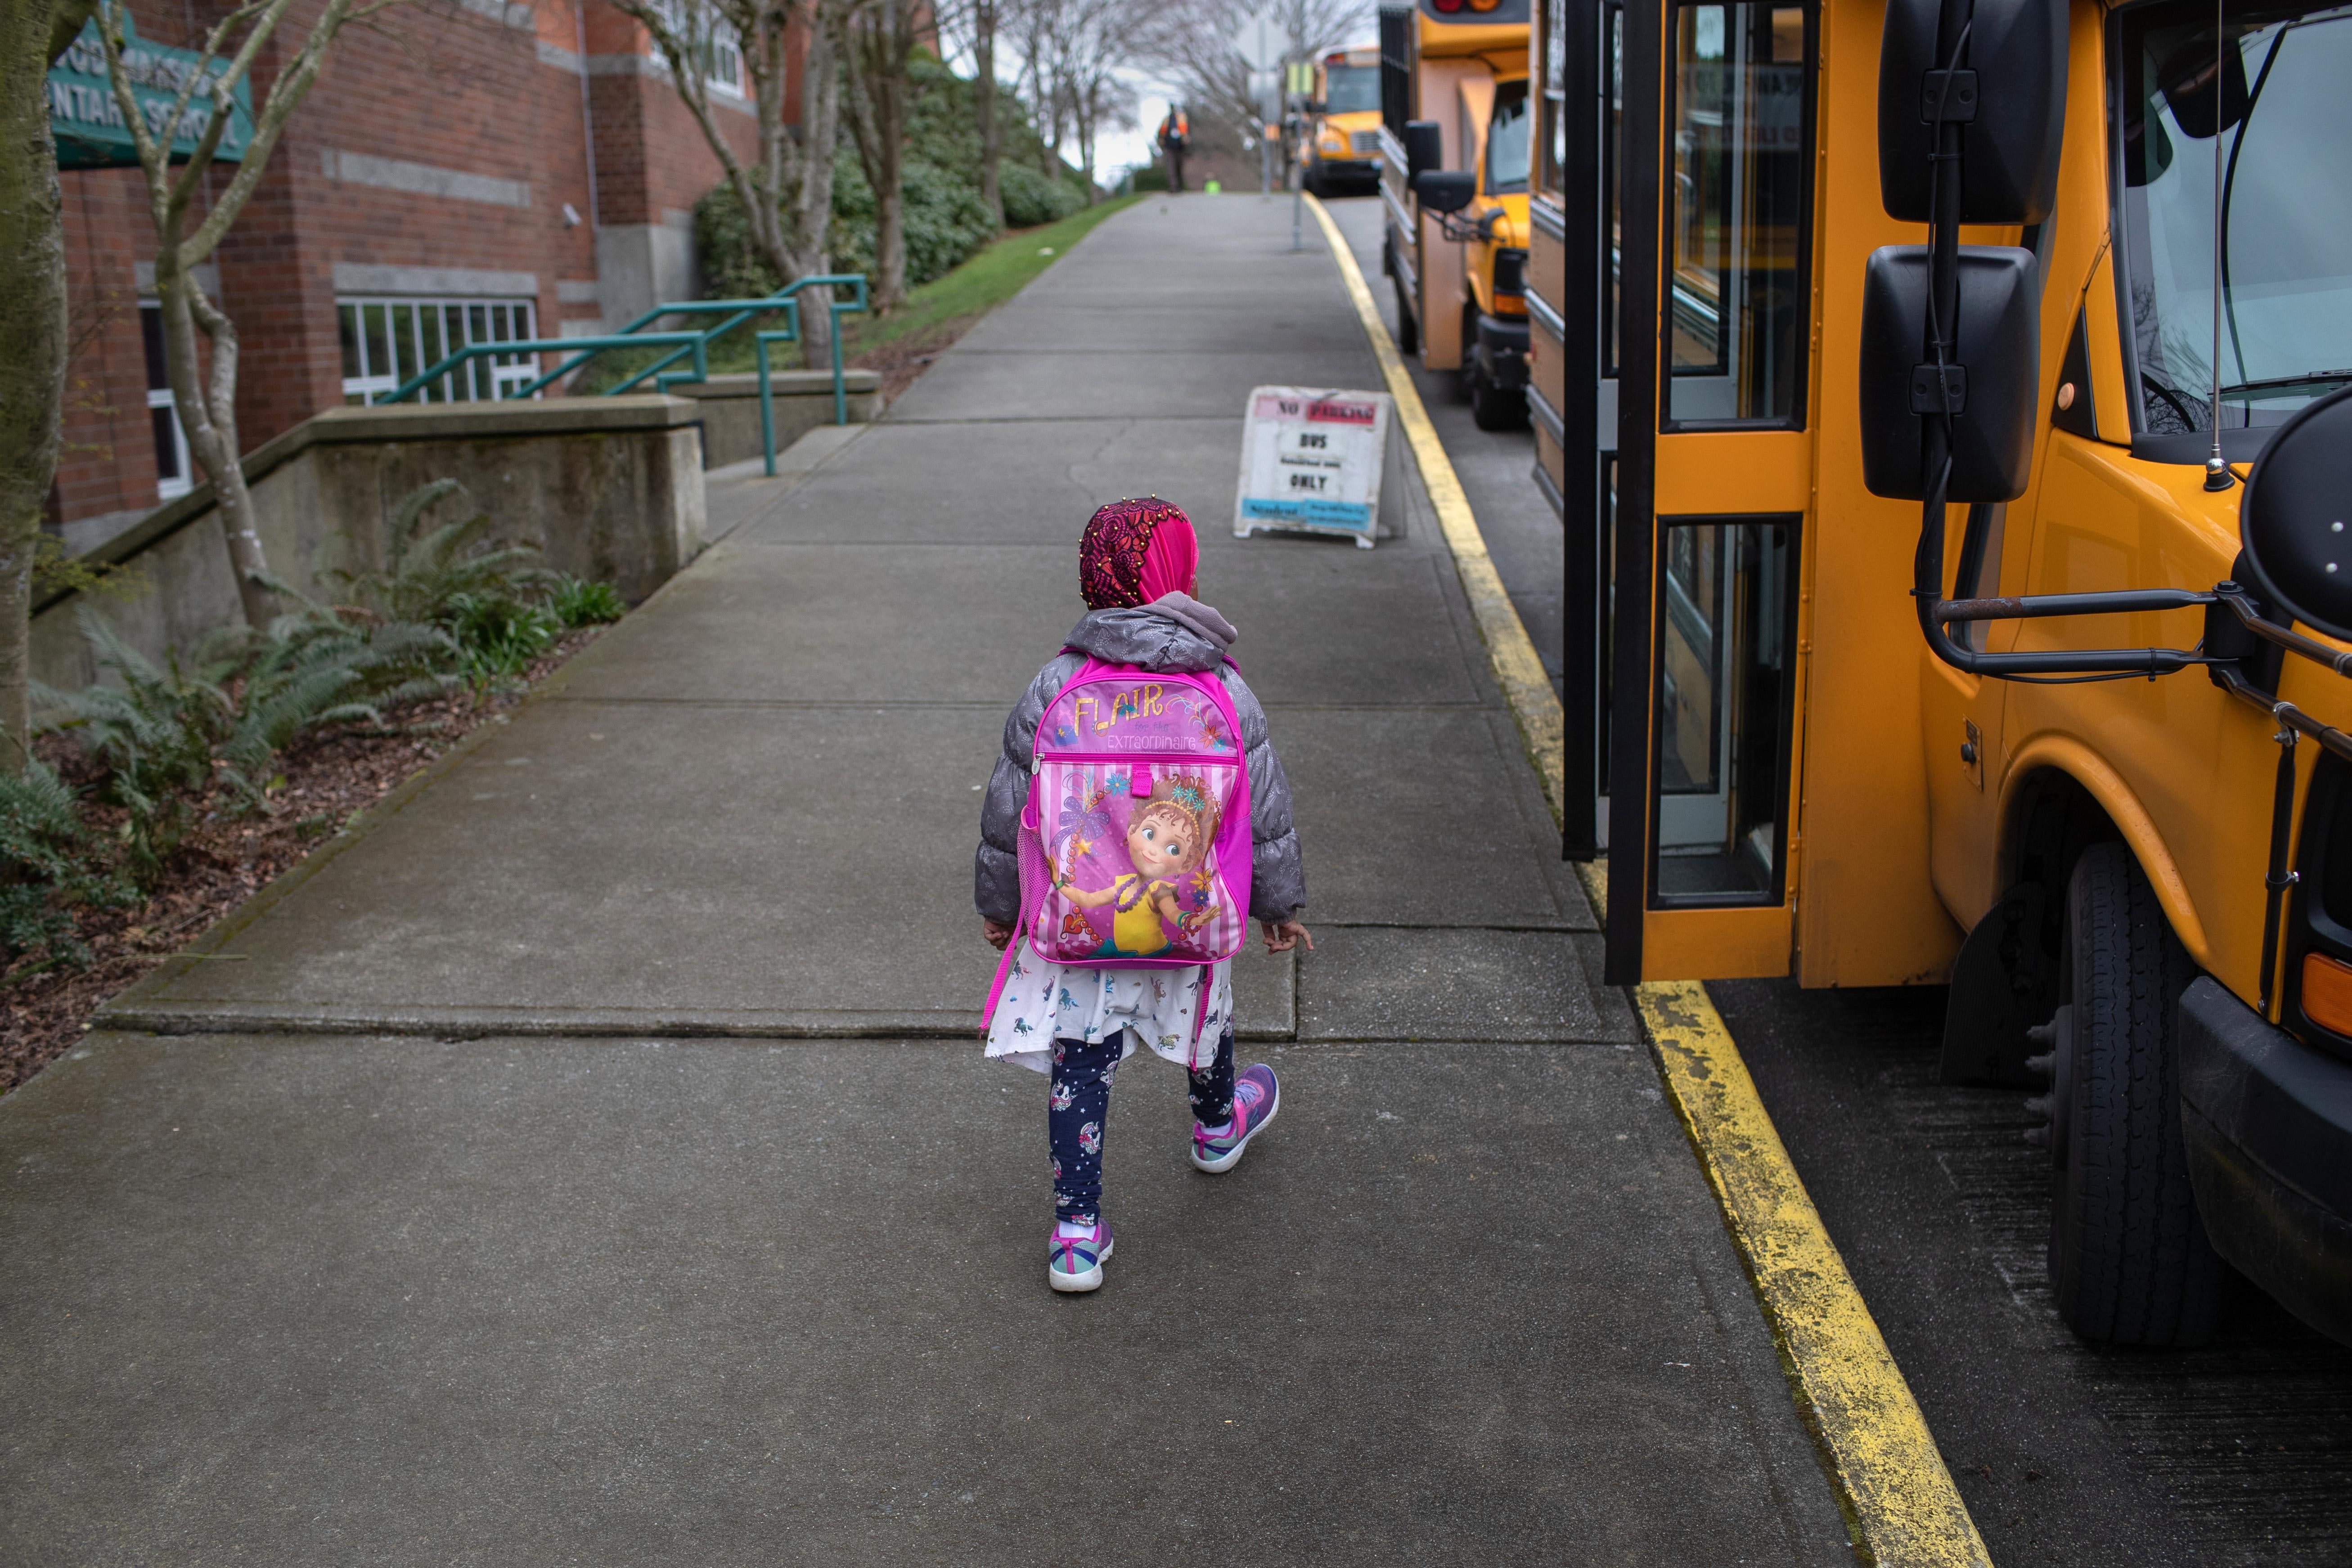 A student leaves the Thurgood Marshal Elementary school after the Seattle Public School system was abruptly closed due to coronavirus fears on March 11, 2020 in Seattle, Washington.